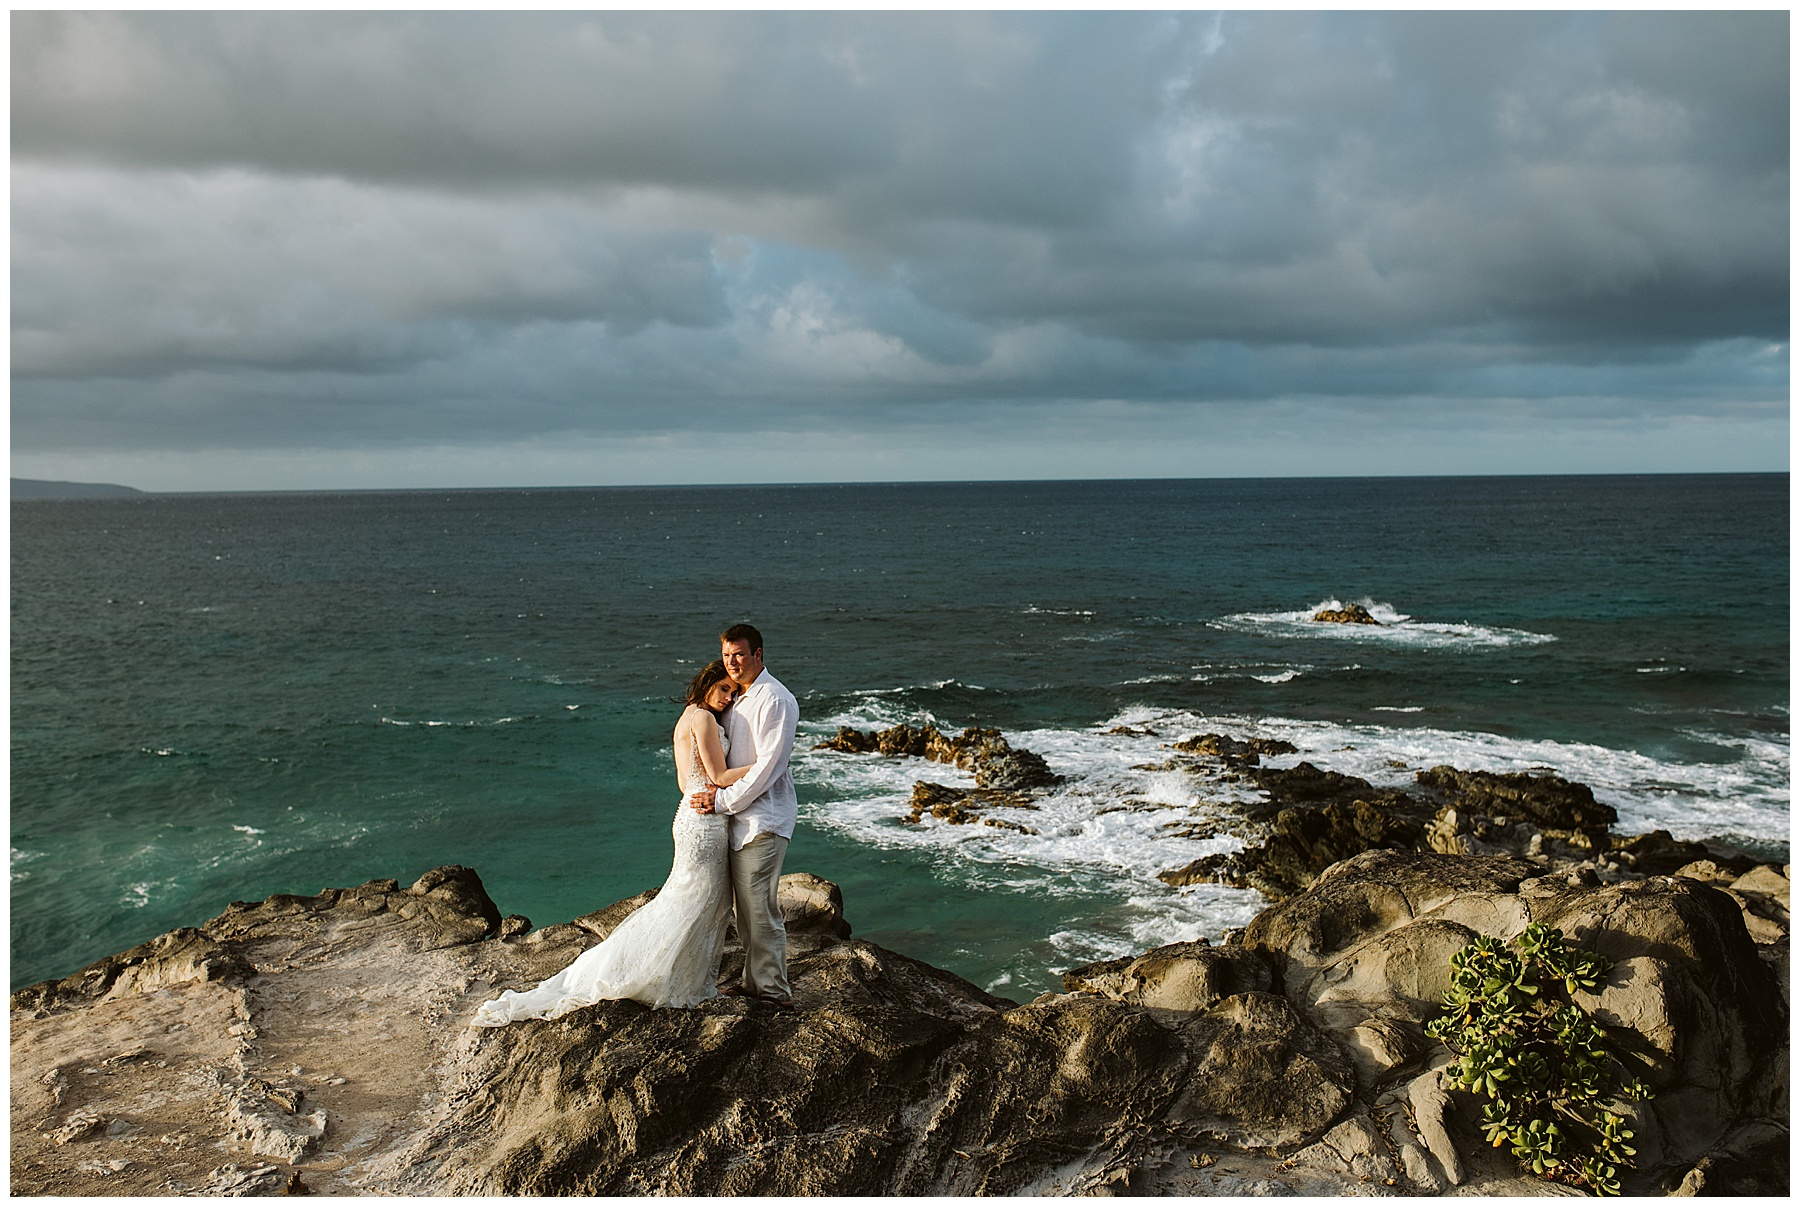 one reason to elope is to have an experience in a beautiful place like this couple, who stands on the cliff edges overlooking the ocean in their elopement attire.